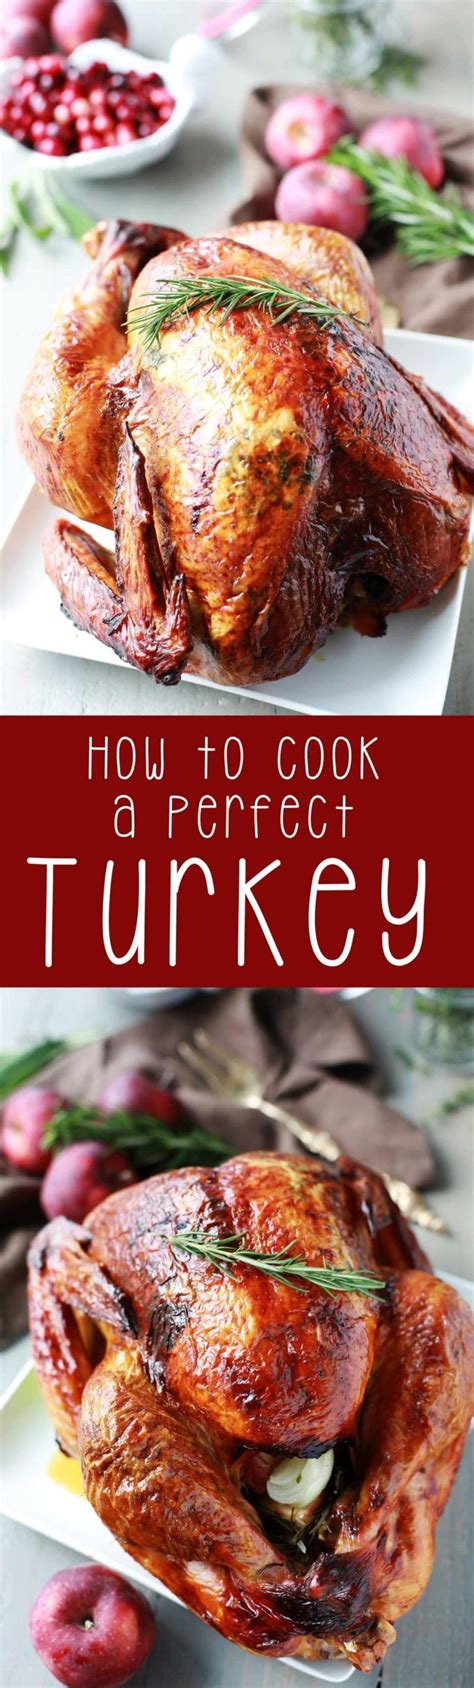 how to cook a perfect turkey recipe turkey recipes cooking turkey cooking